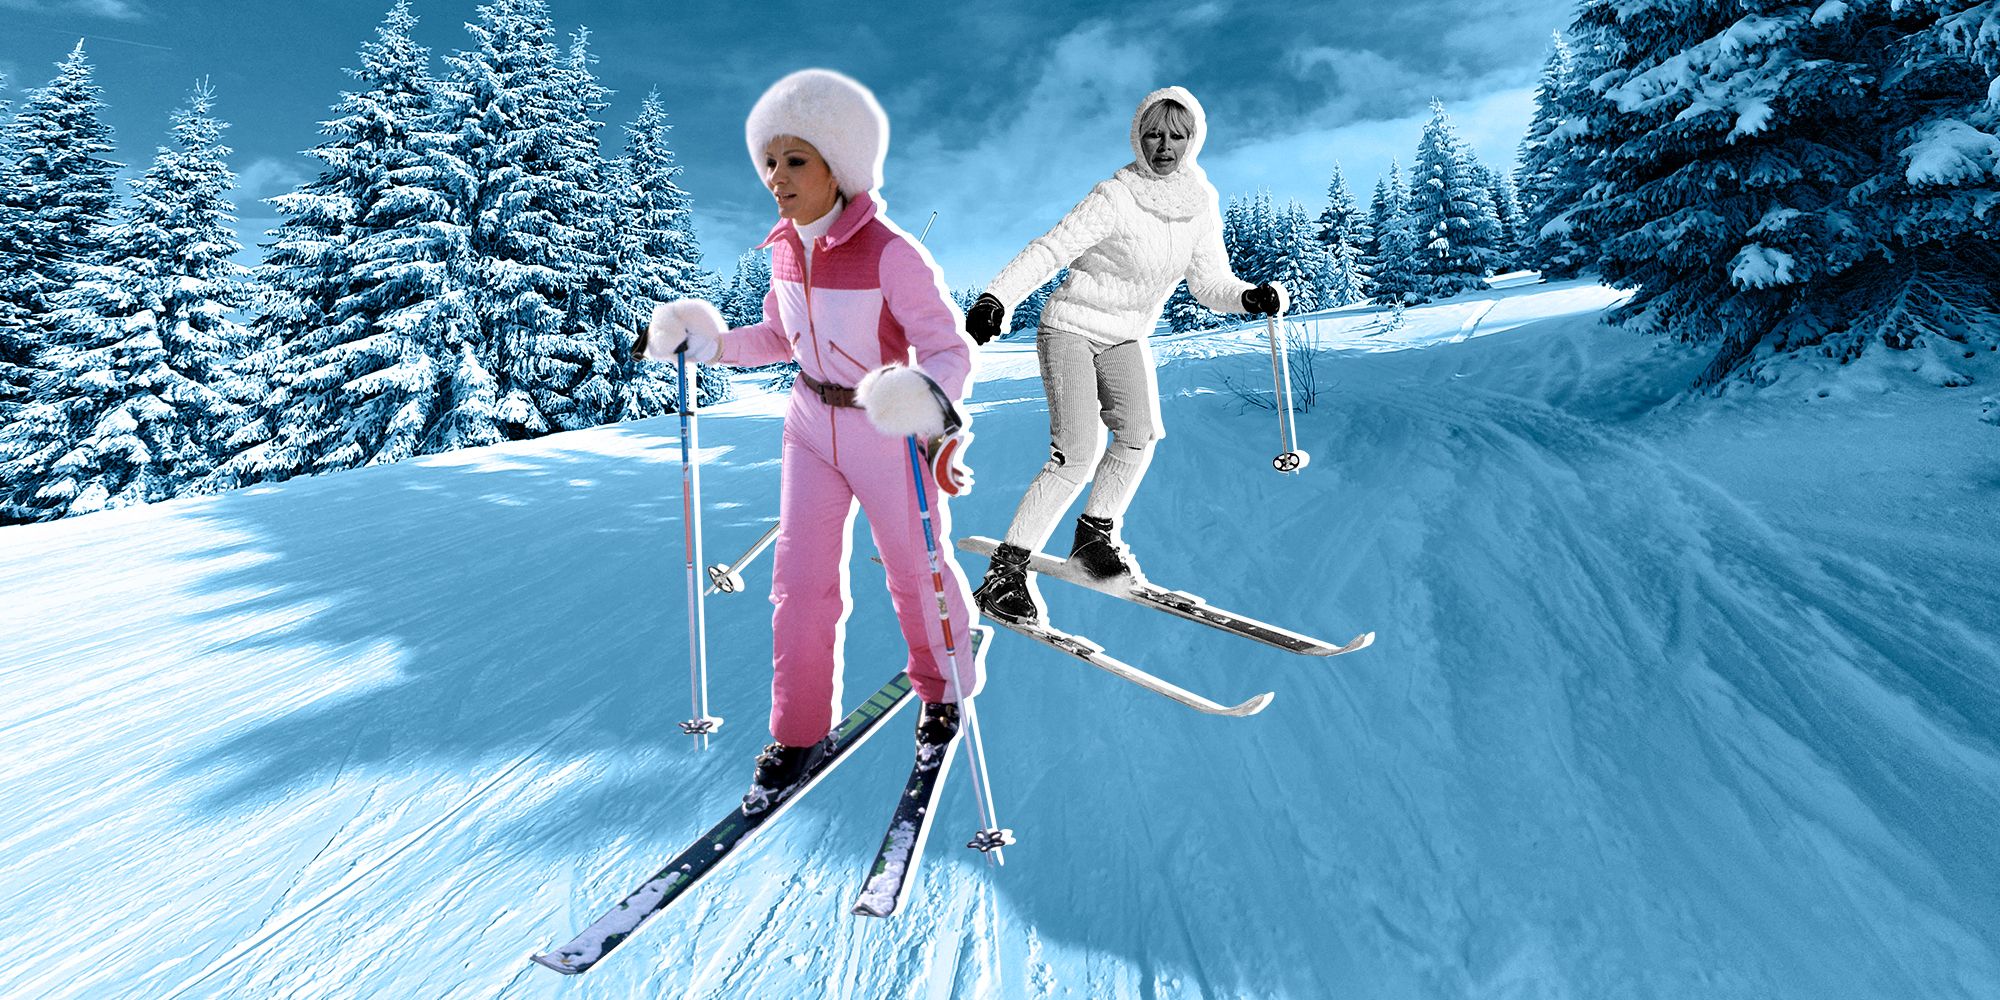 6 Outfits the Slopes Winter 2021- Stylish Apres Ski Outfit Ideas